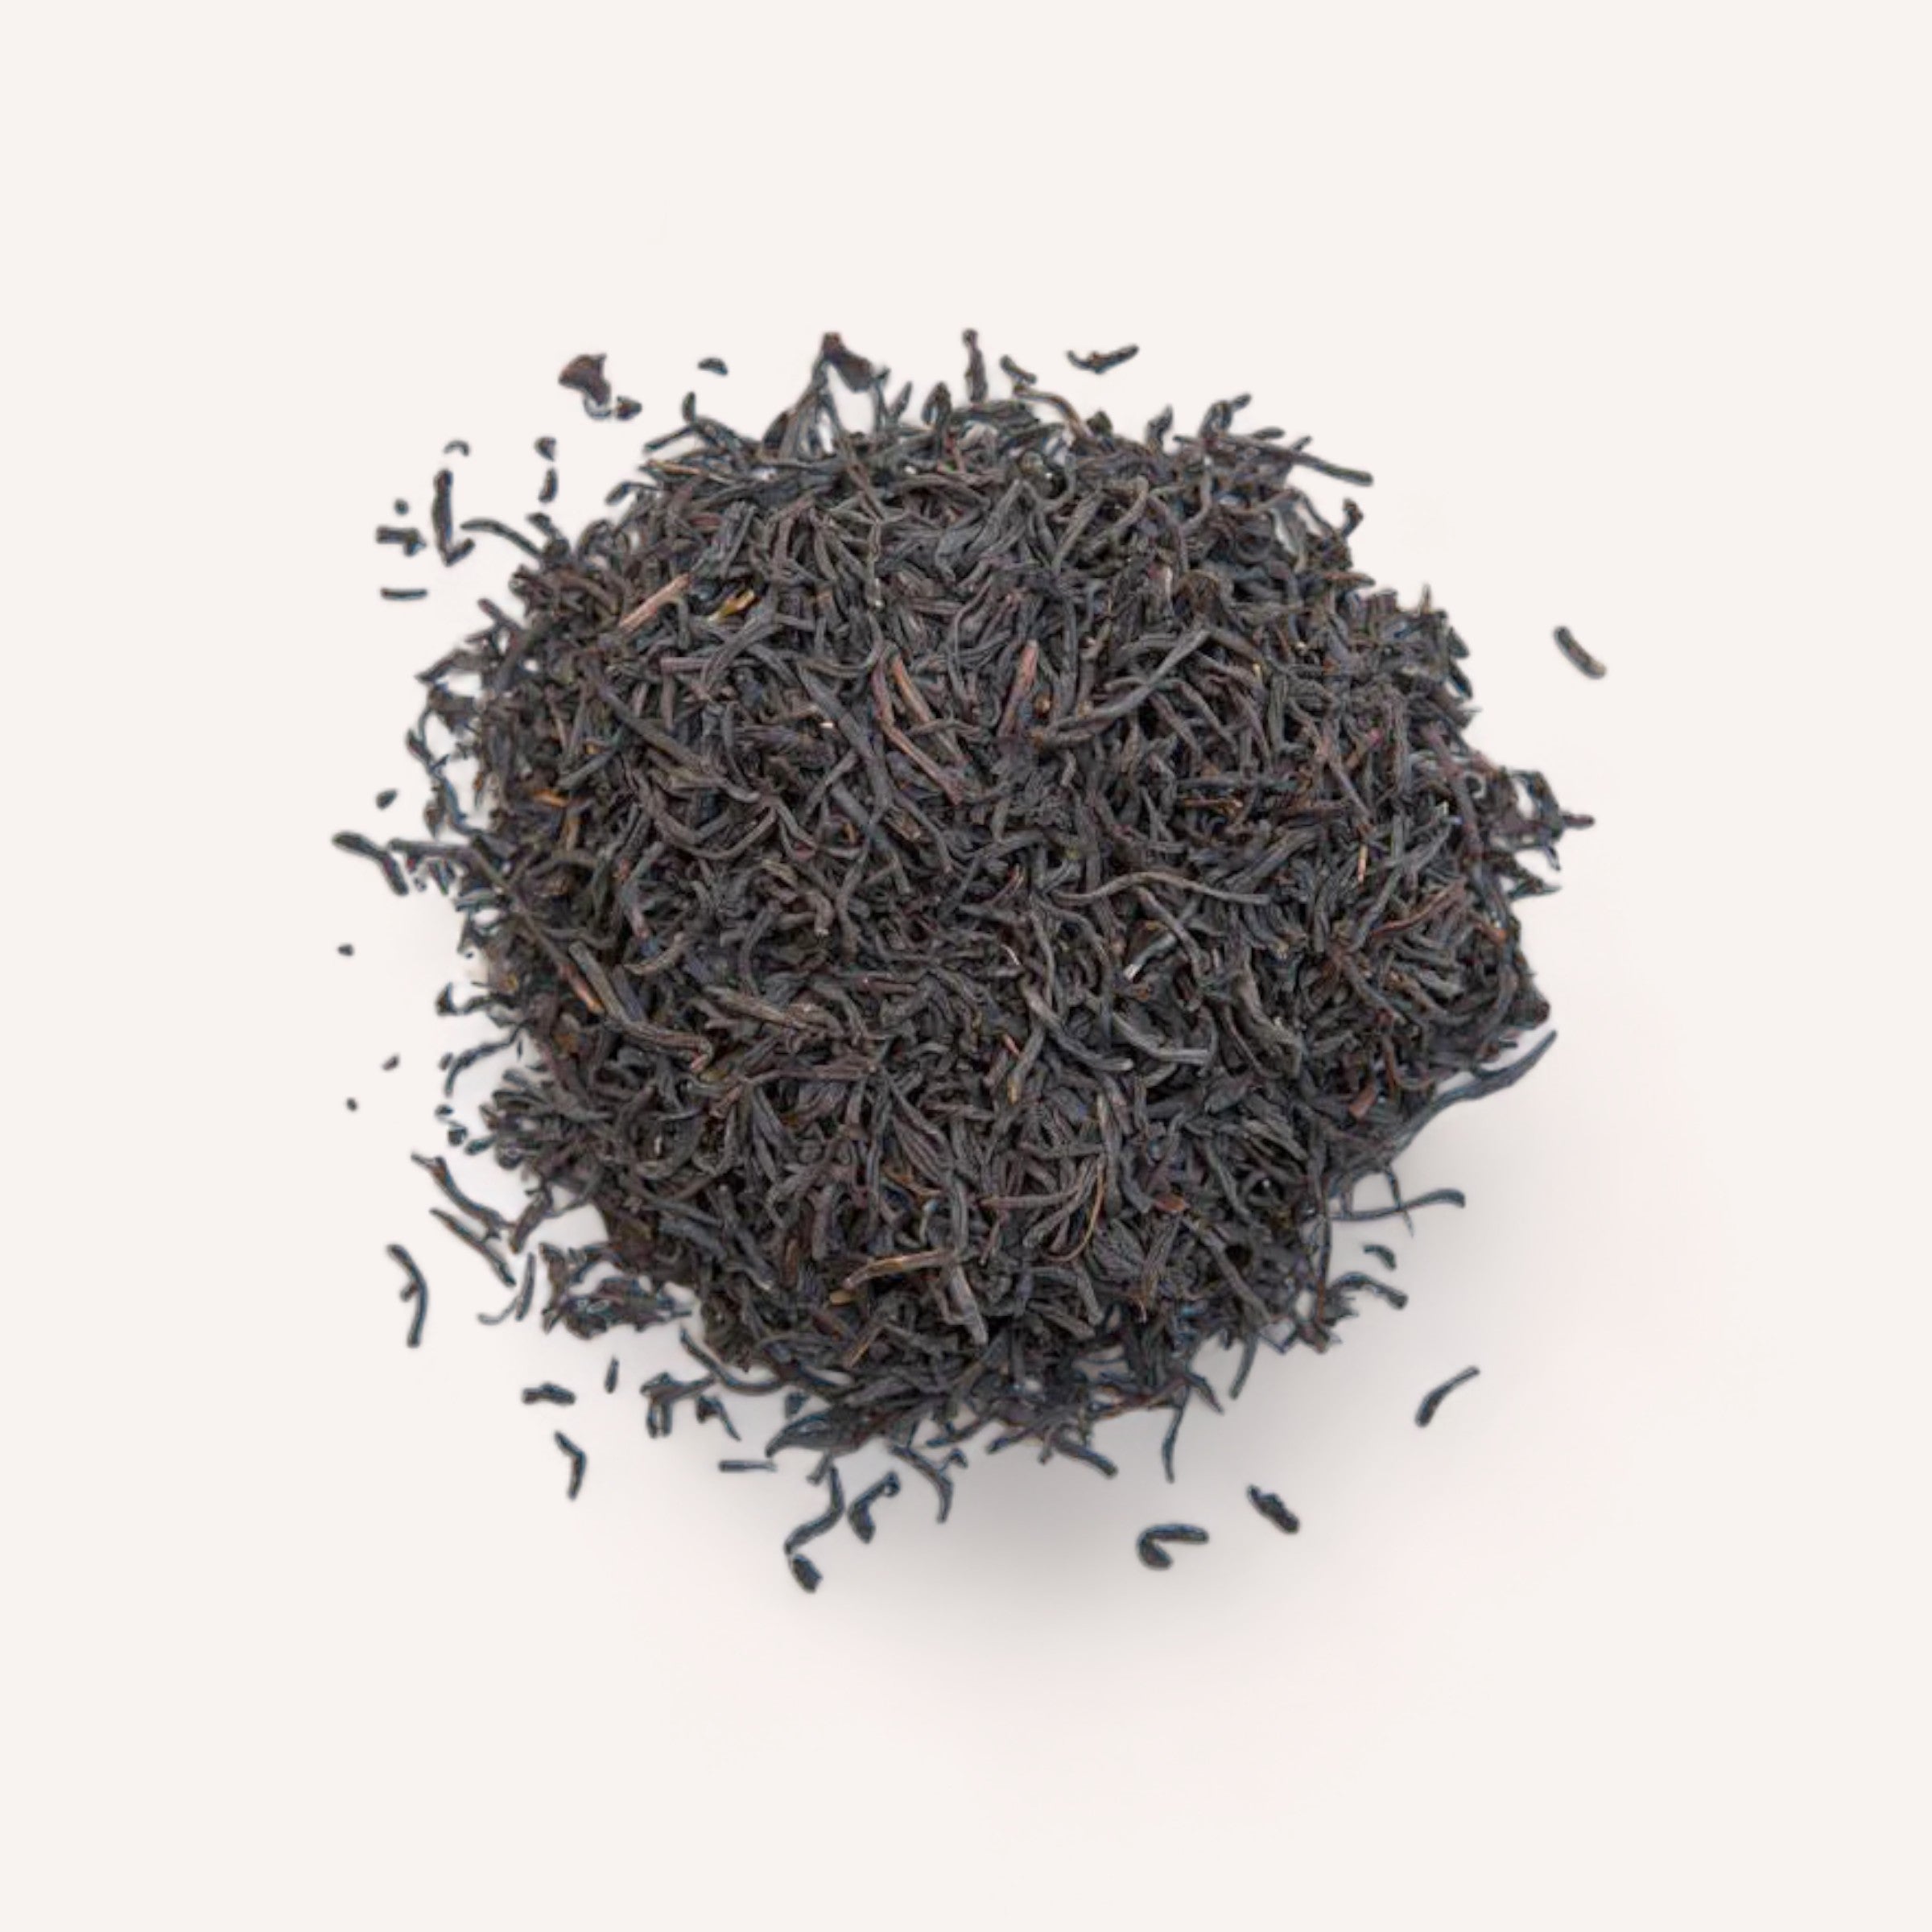 A mound of loose English Breakfast Tea by Forage + Bloom black tea leaves, rich in antioxidants, isolated on a white background.